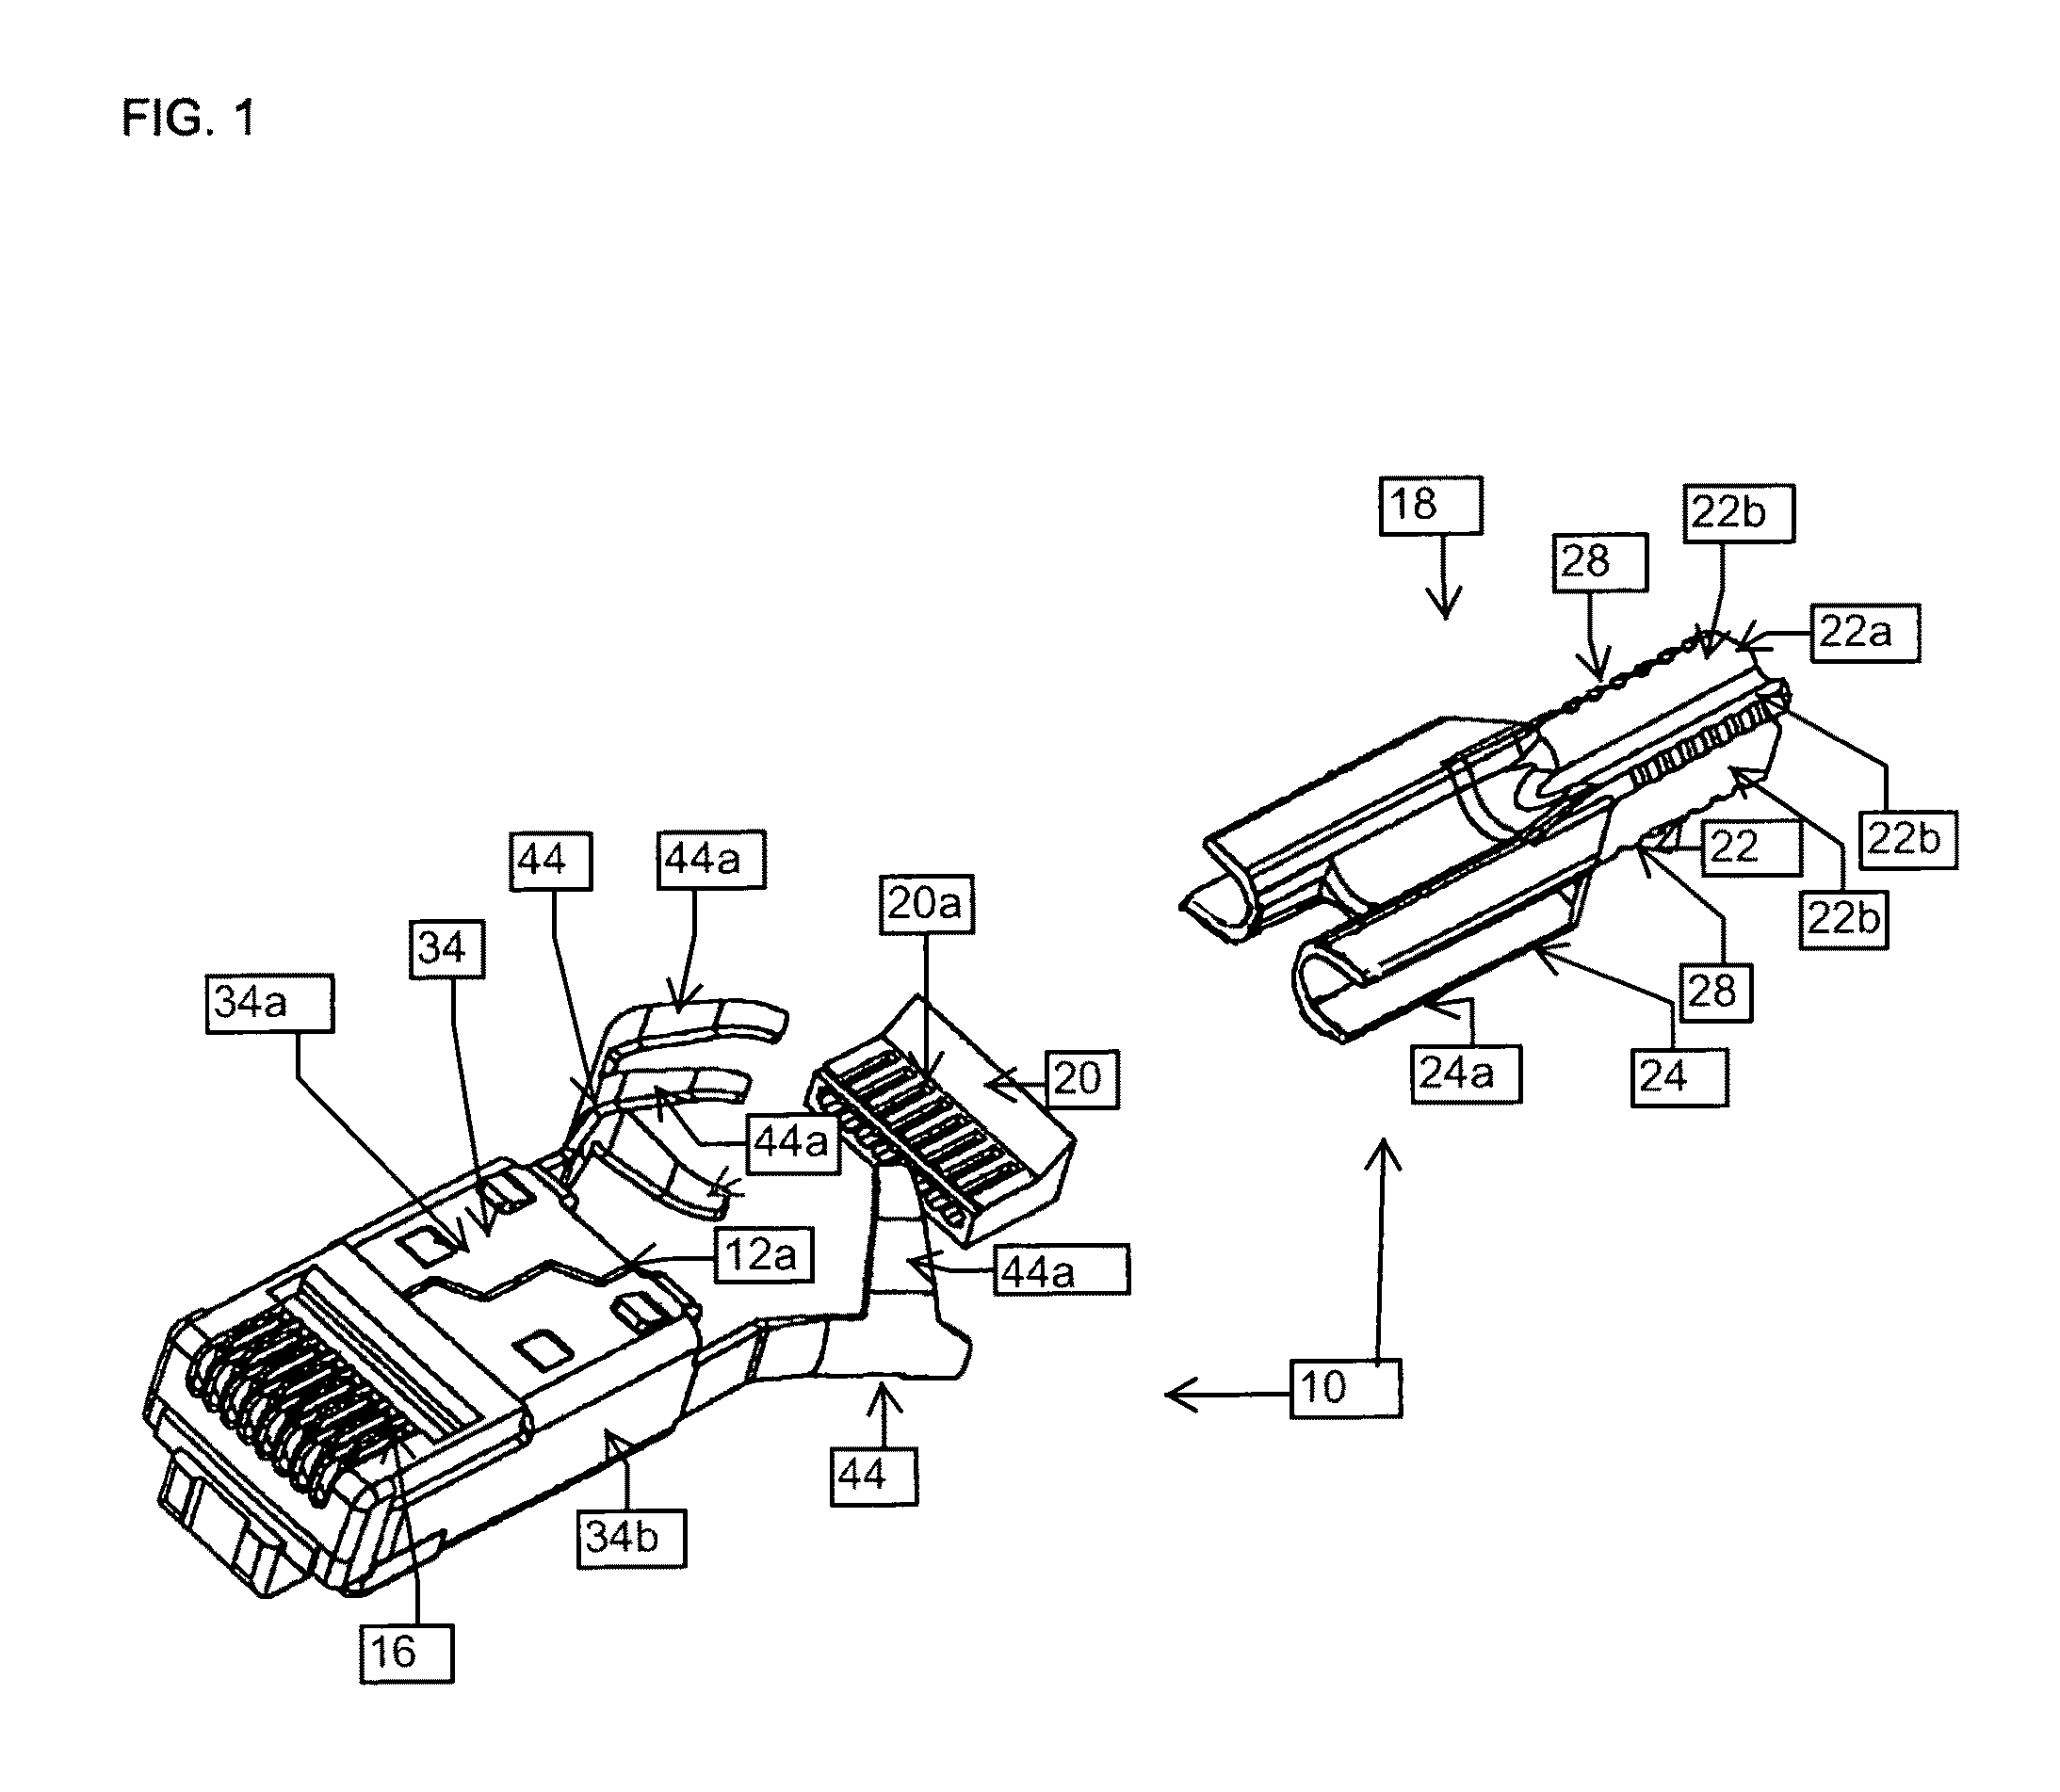 Modular connector plug having a wire guide filter with an impedance containing portion and a cable guide portion